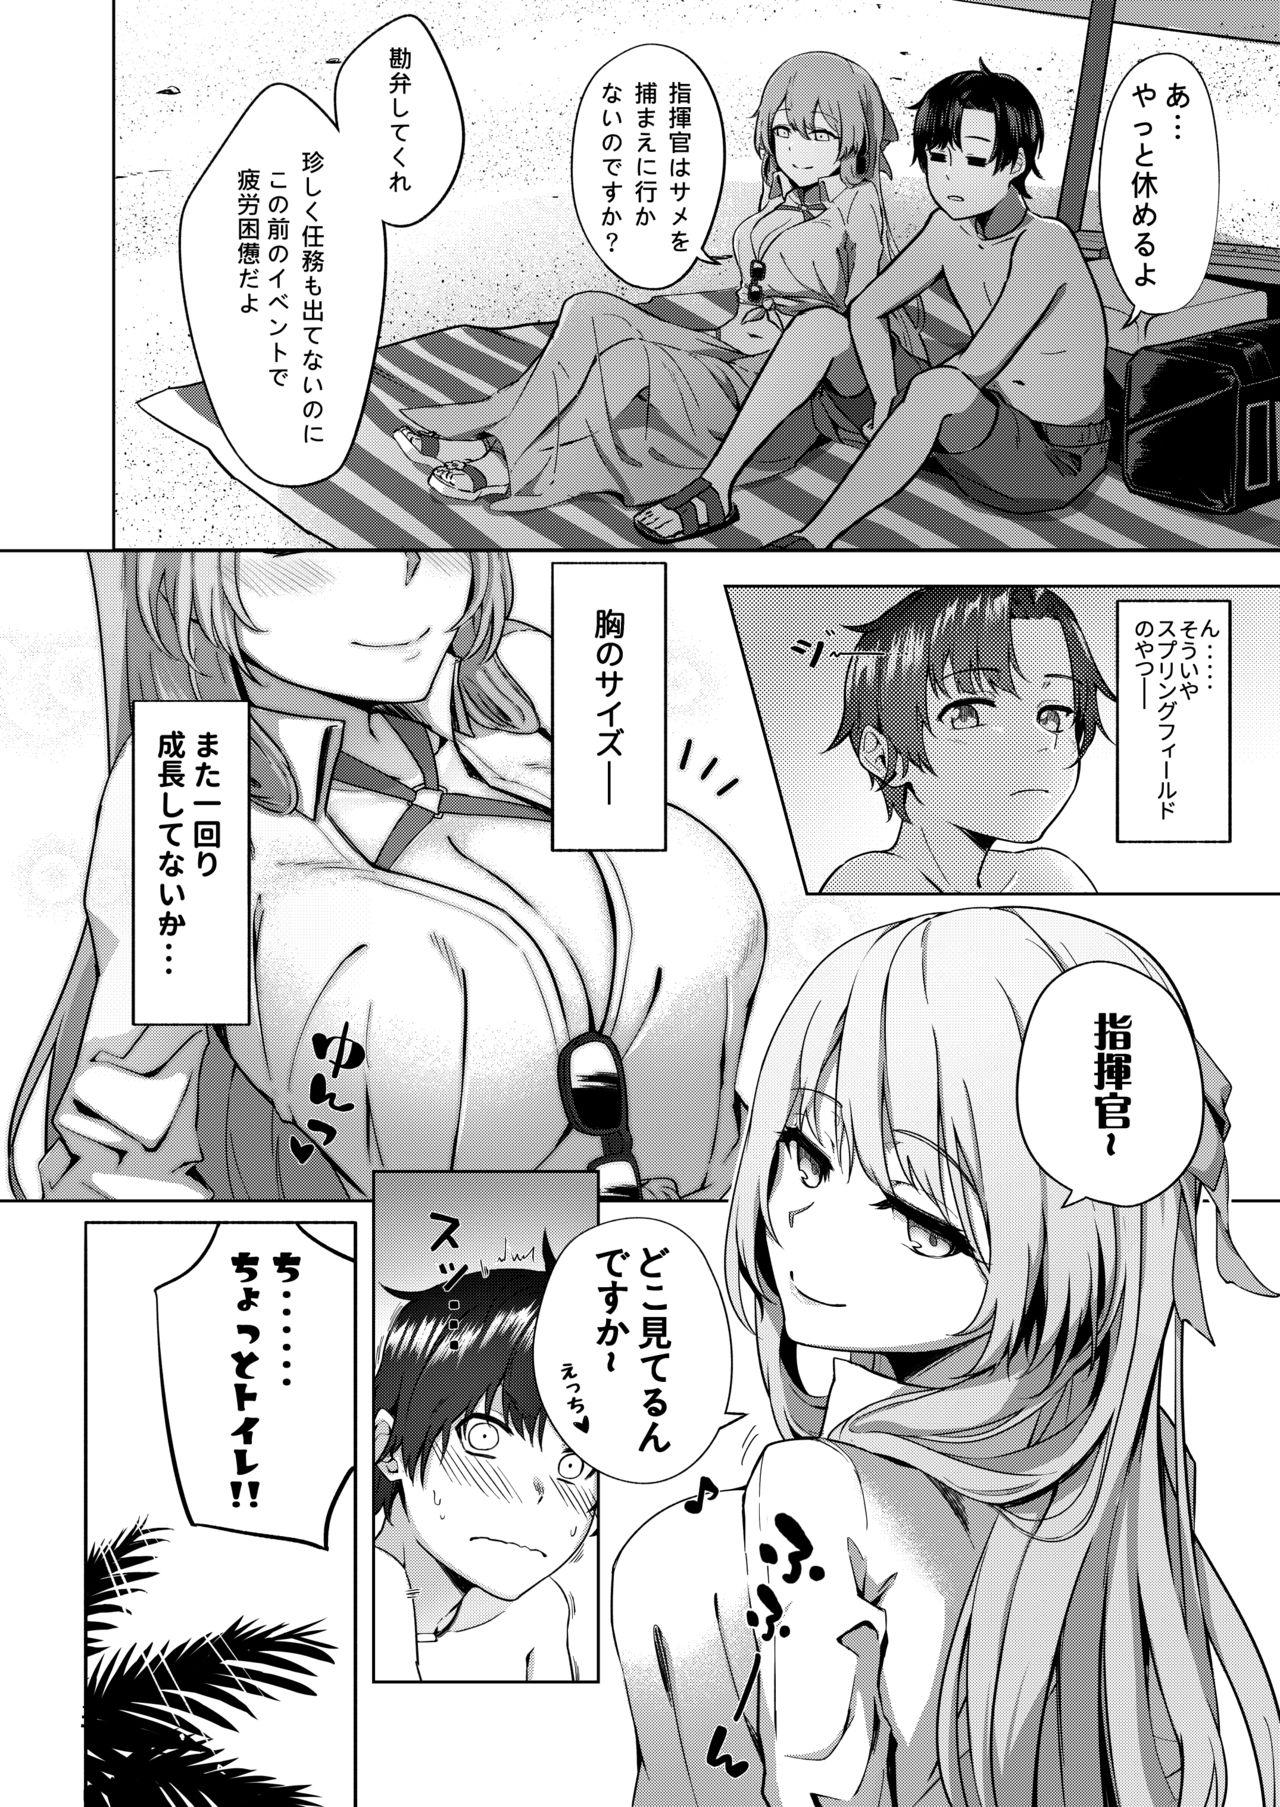 Top Field on Fire - Girls frontline Trans - Page 4